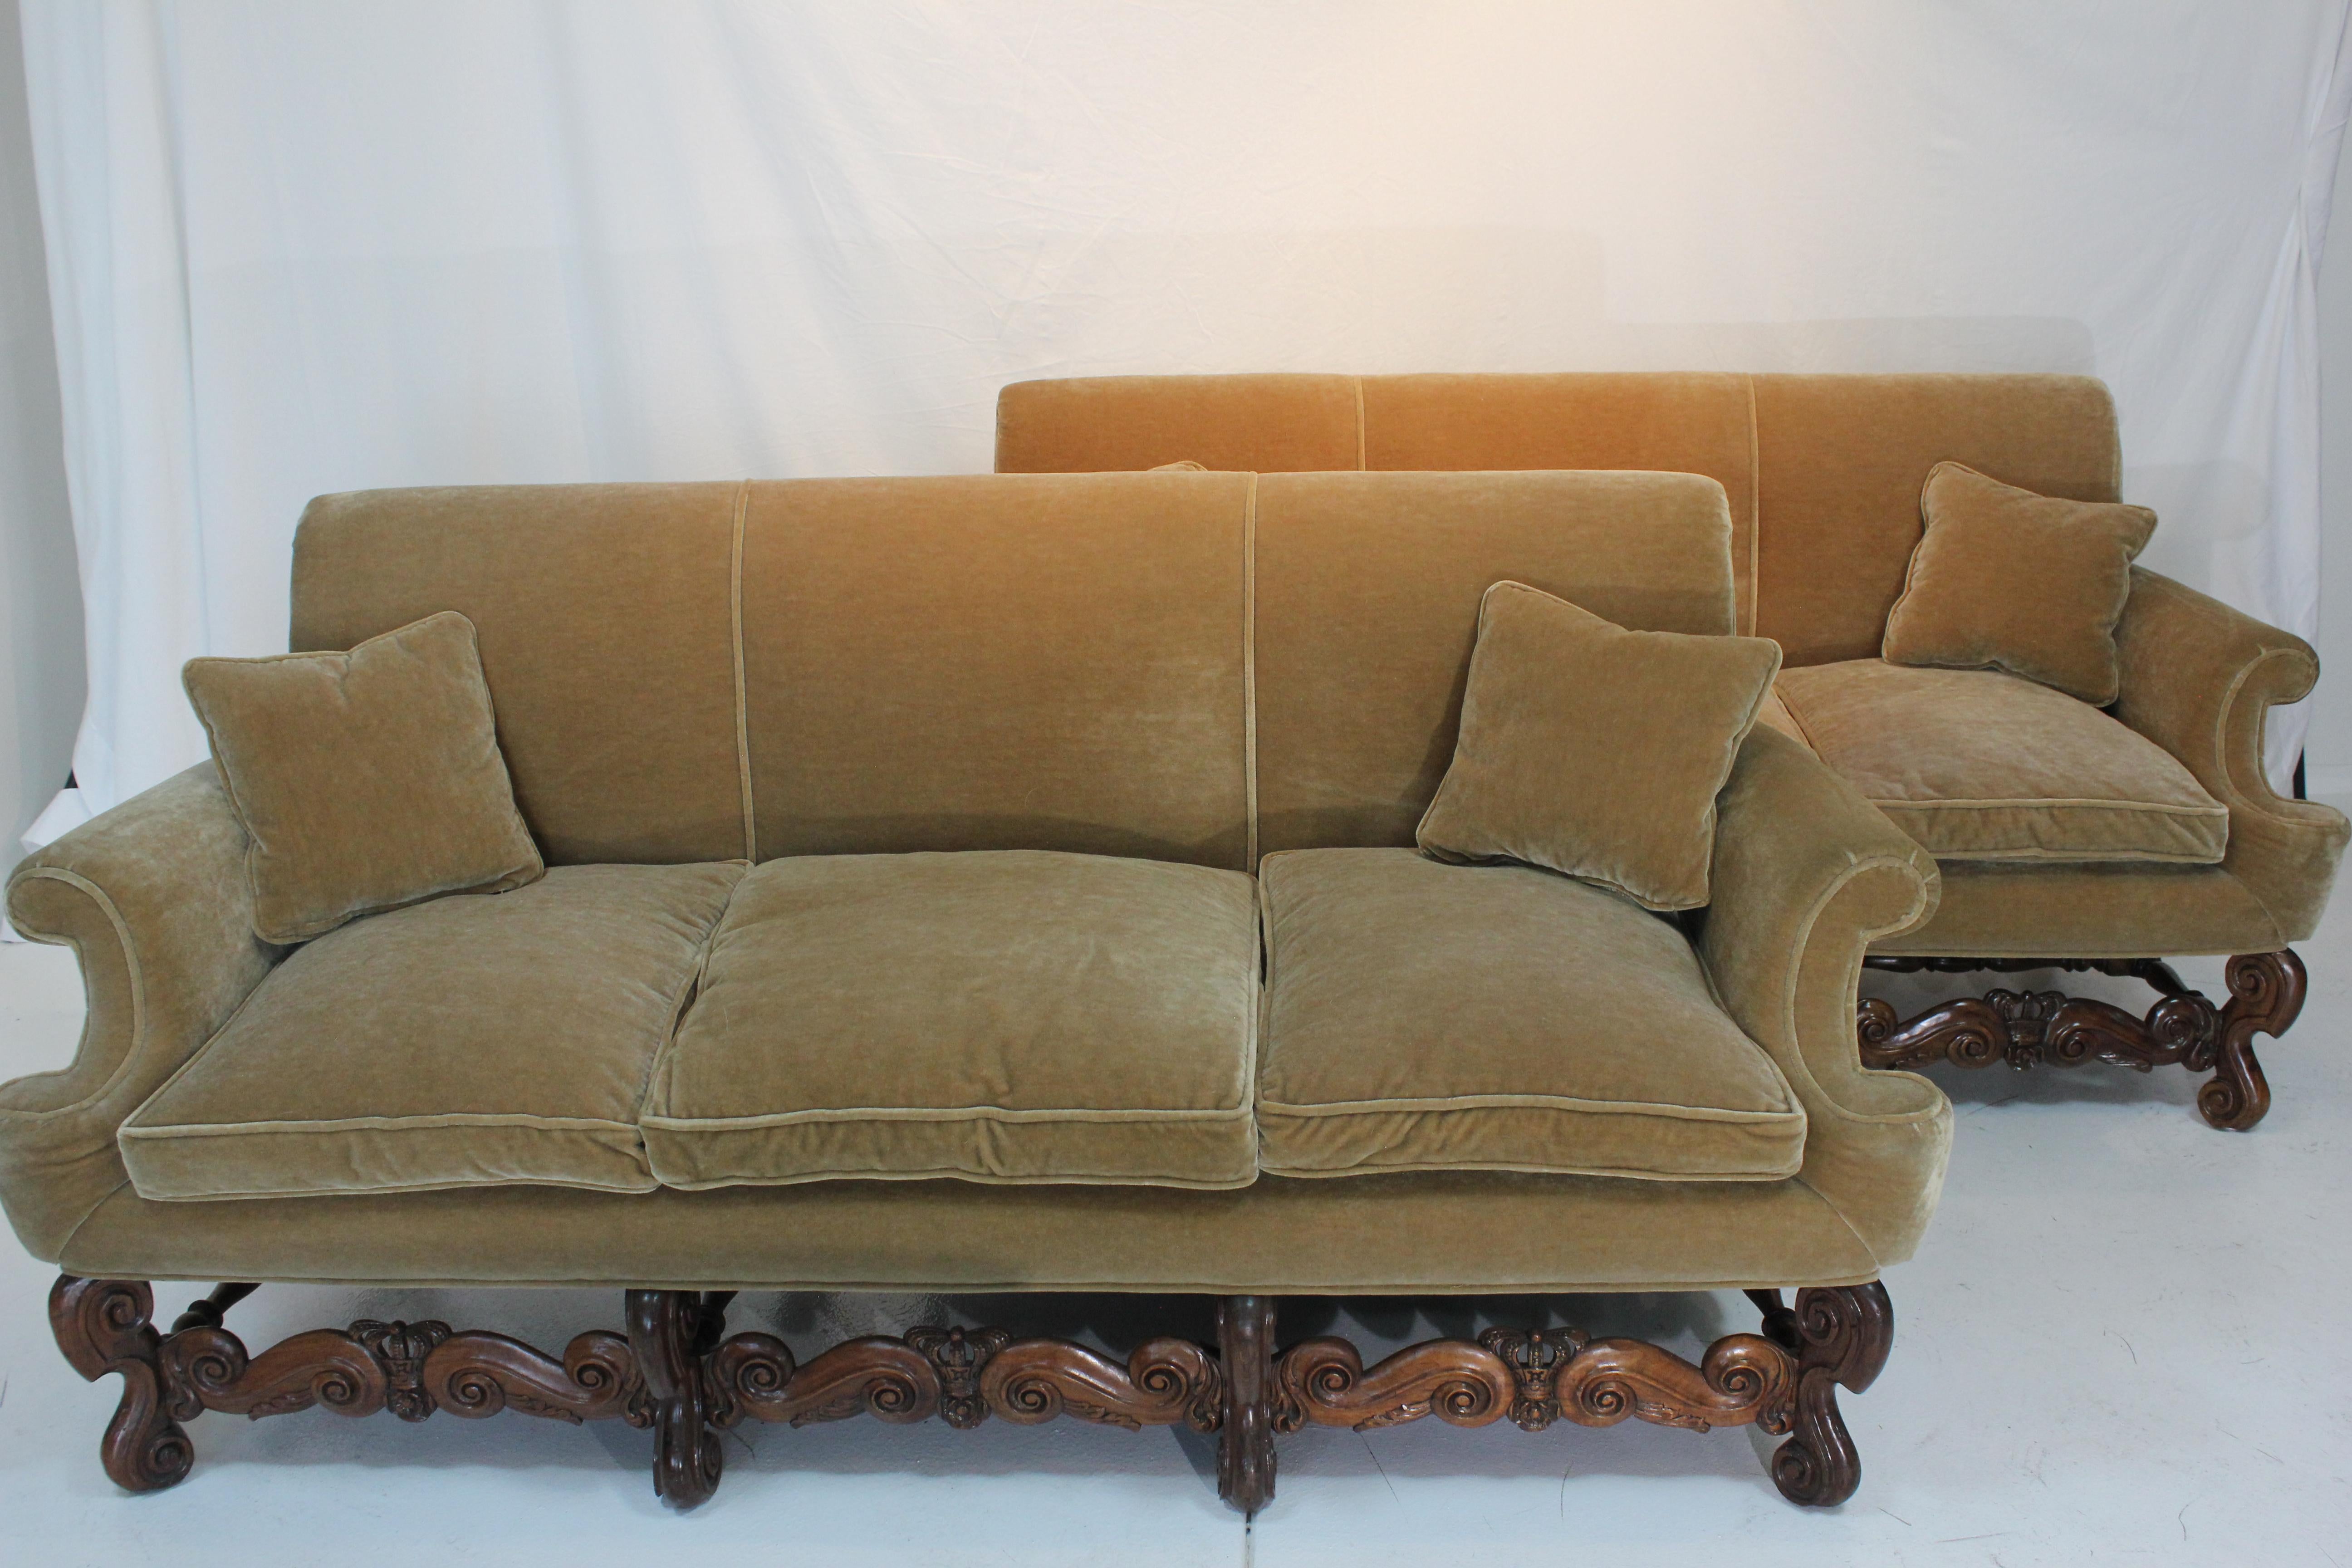 Down Antique Pair of Charles II Style Carved Walnut Sofas w/ Mohair Fabric Circa 1900 For Sale